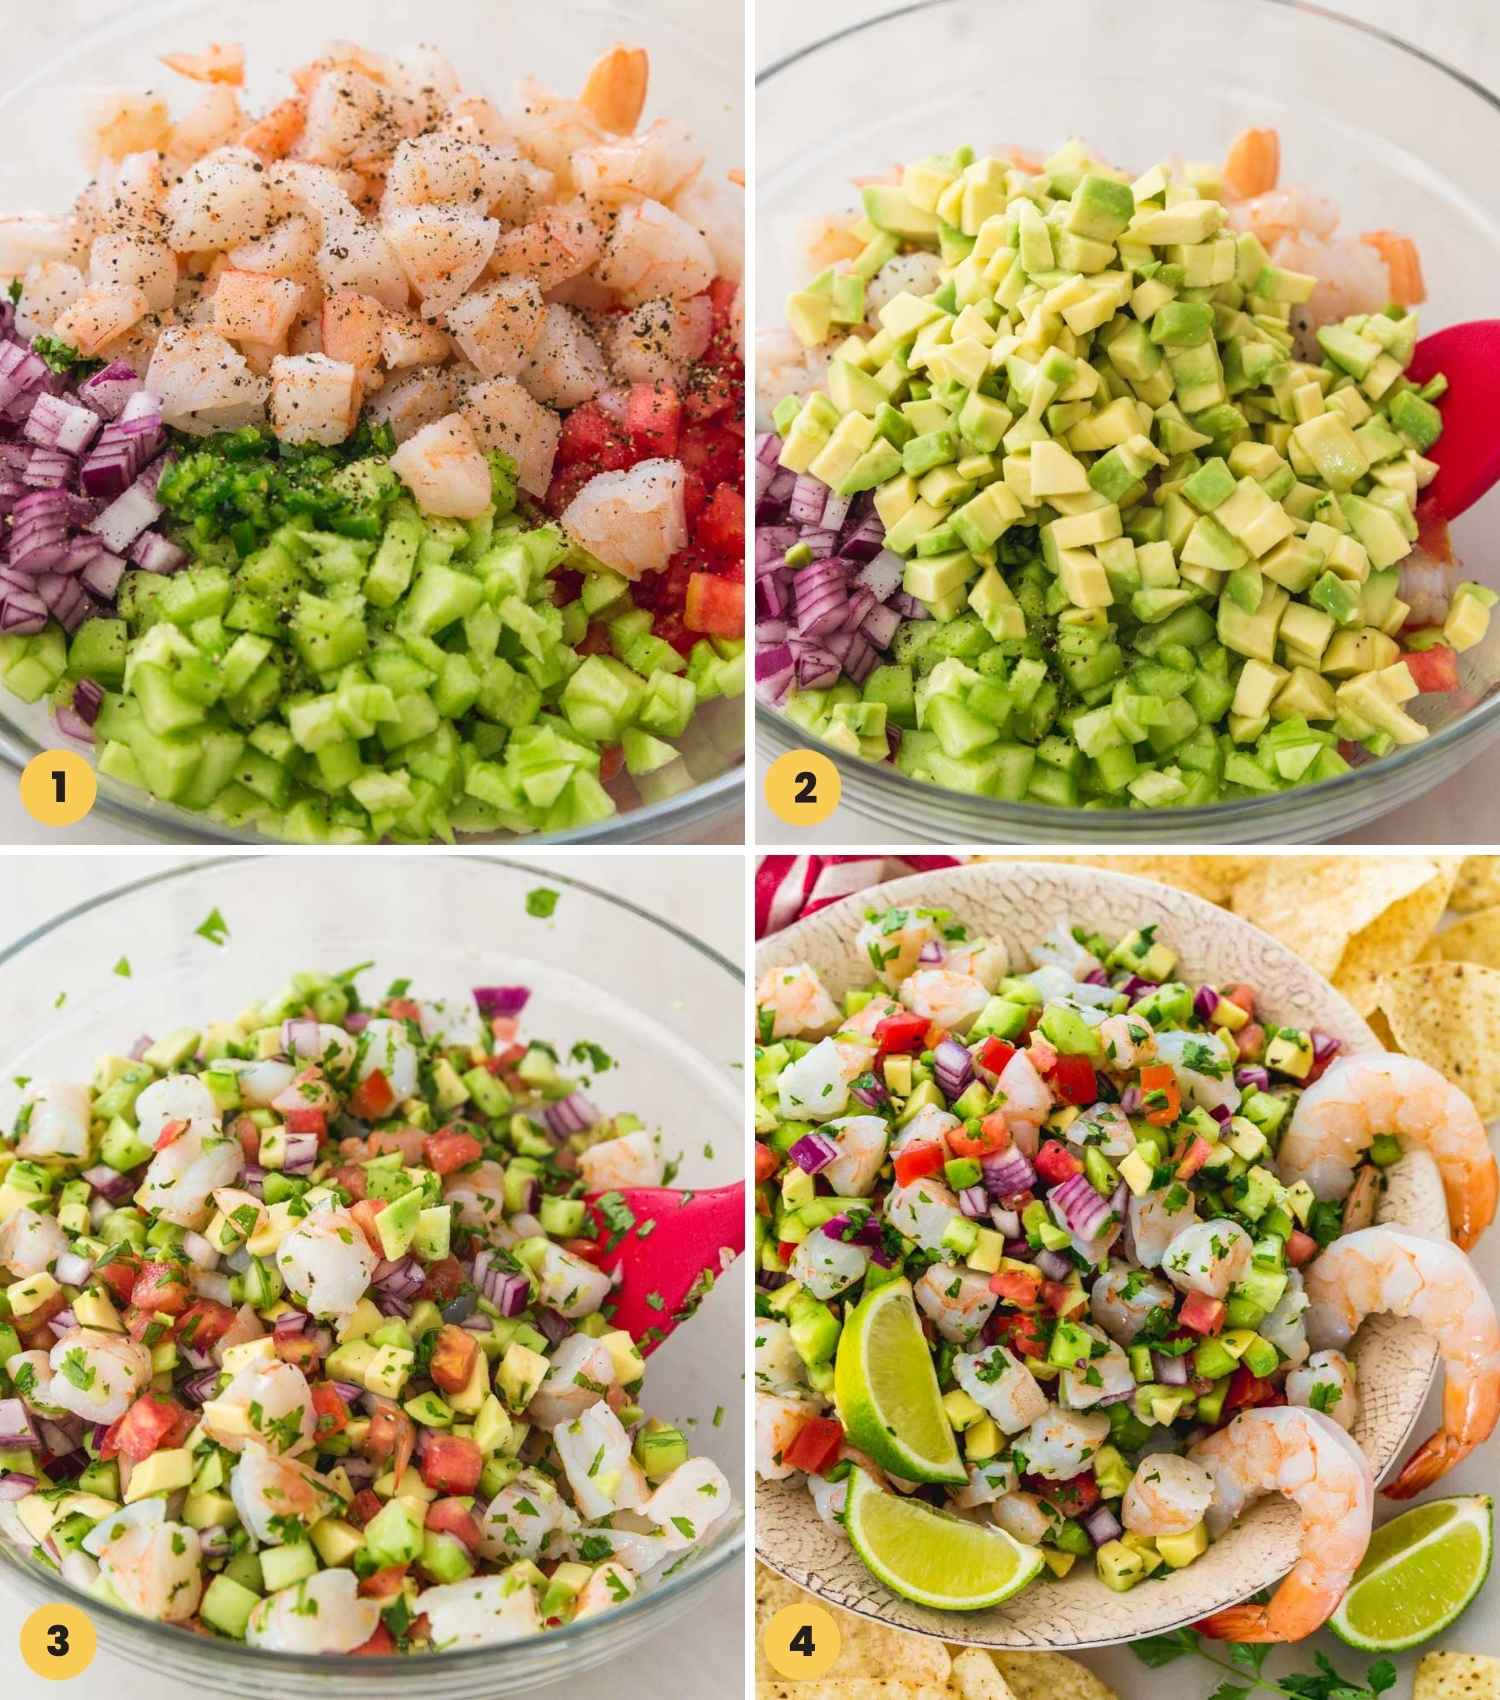 A collage with 4 images showing how to make ceviche by mixing all the ingredients together